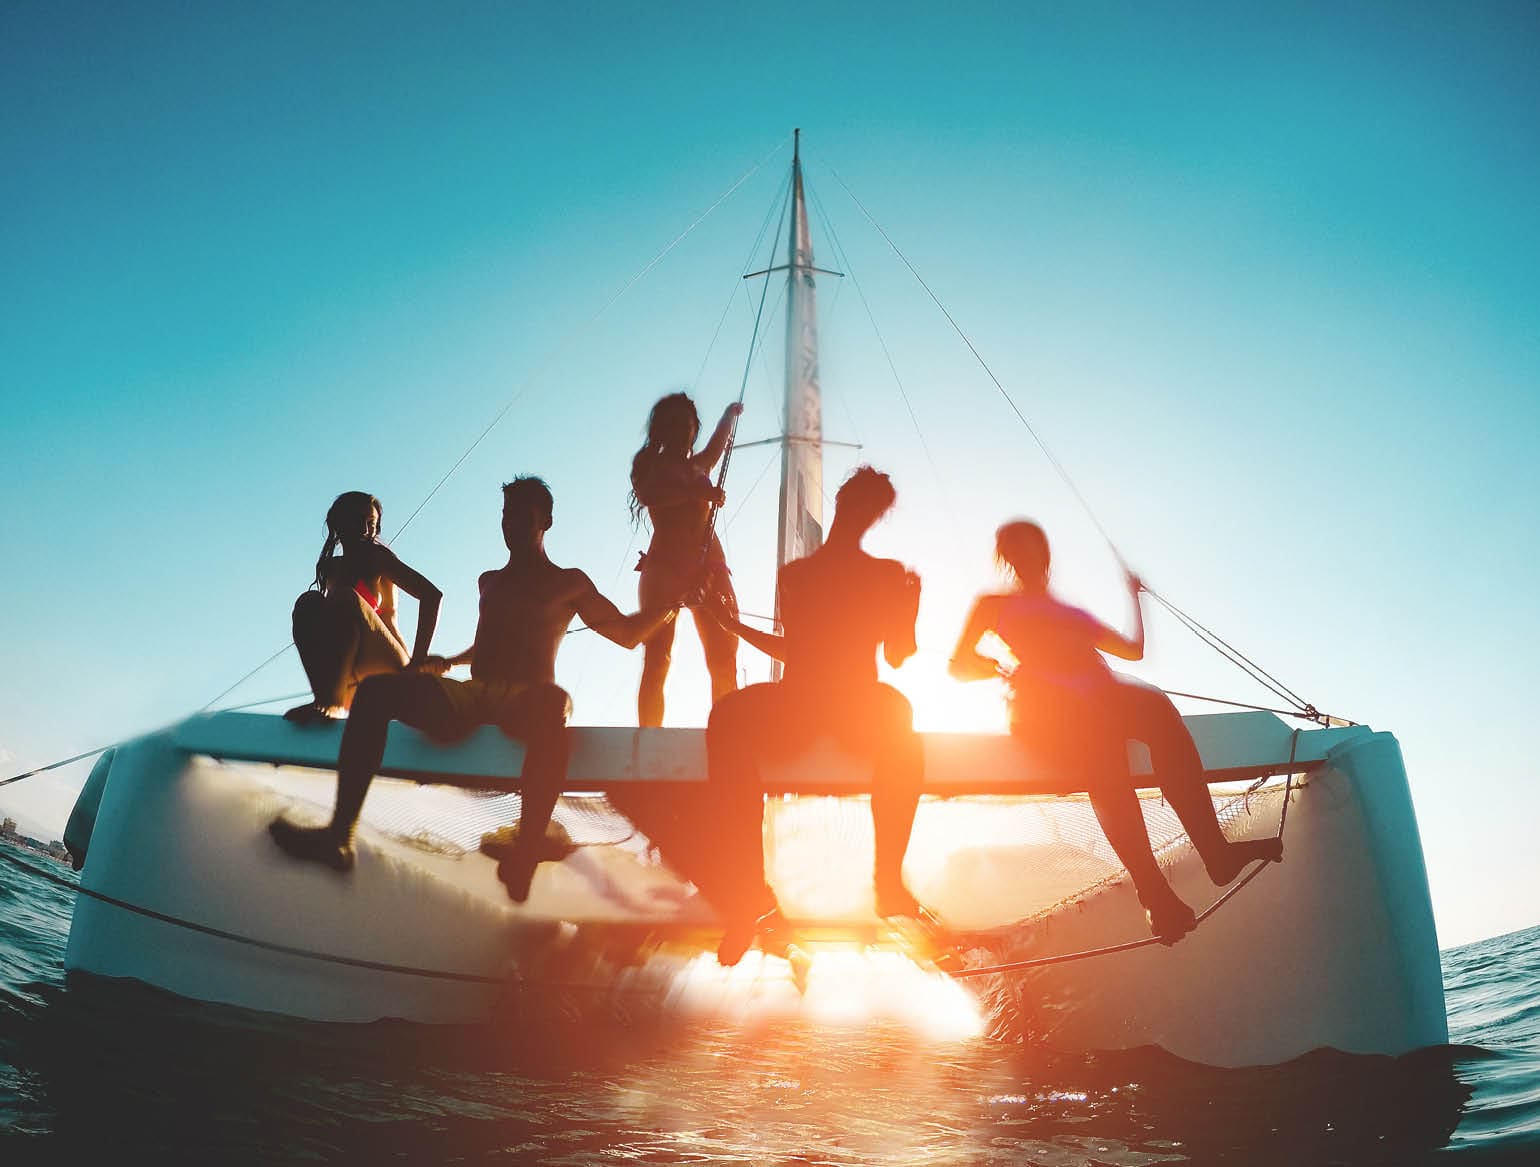 Silhouette of young friends chilling in catamaran boat - Group of people making tour ocean trip - Travel, summer, friendship, tropical concept - Focus on two left guys - Water on camera